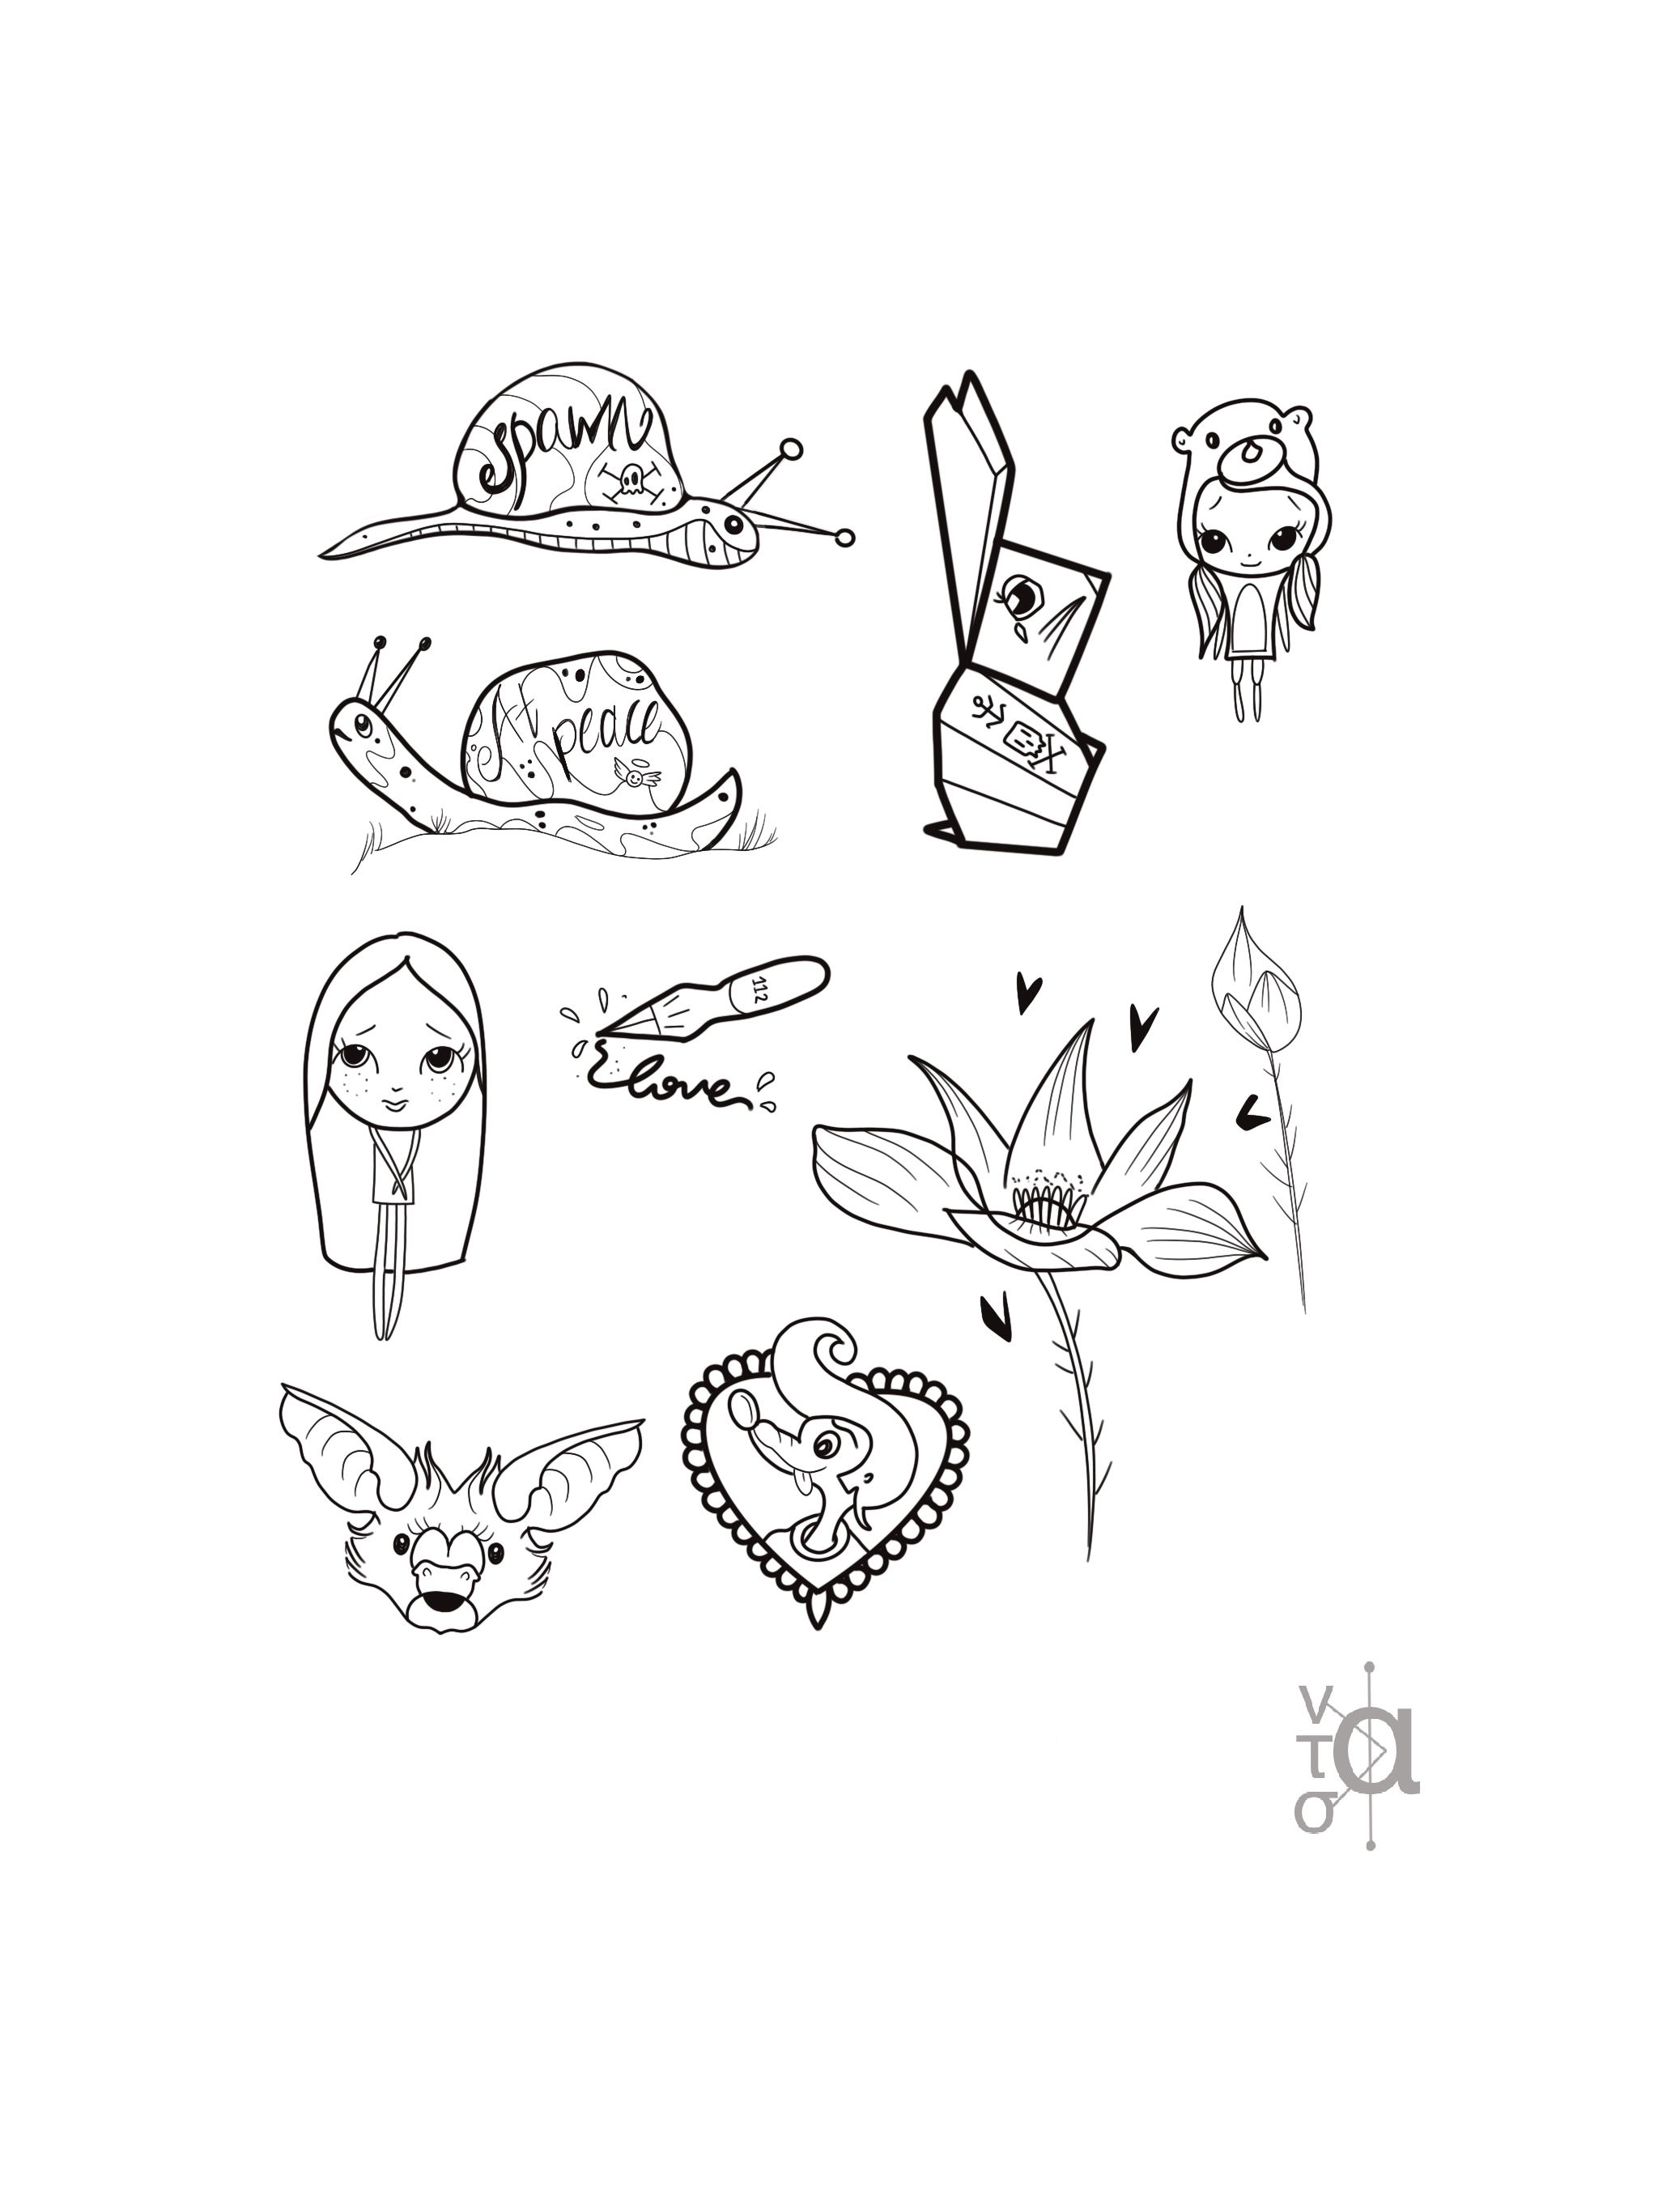 Bag Waterproof Mini Temporary Tattoos Stickers With Random Pattern For  Clavicle And Finger Piercings Small And Fresh 5x5cm XX0724 From  Konig_albert, $4.56 | DHgate.Com